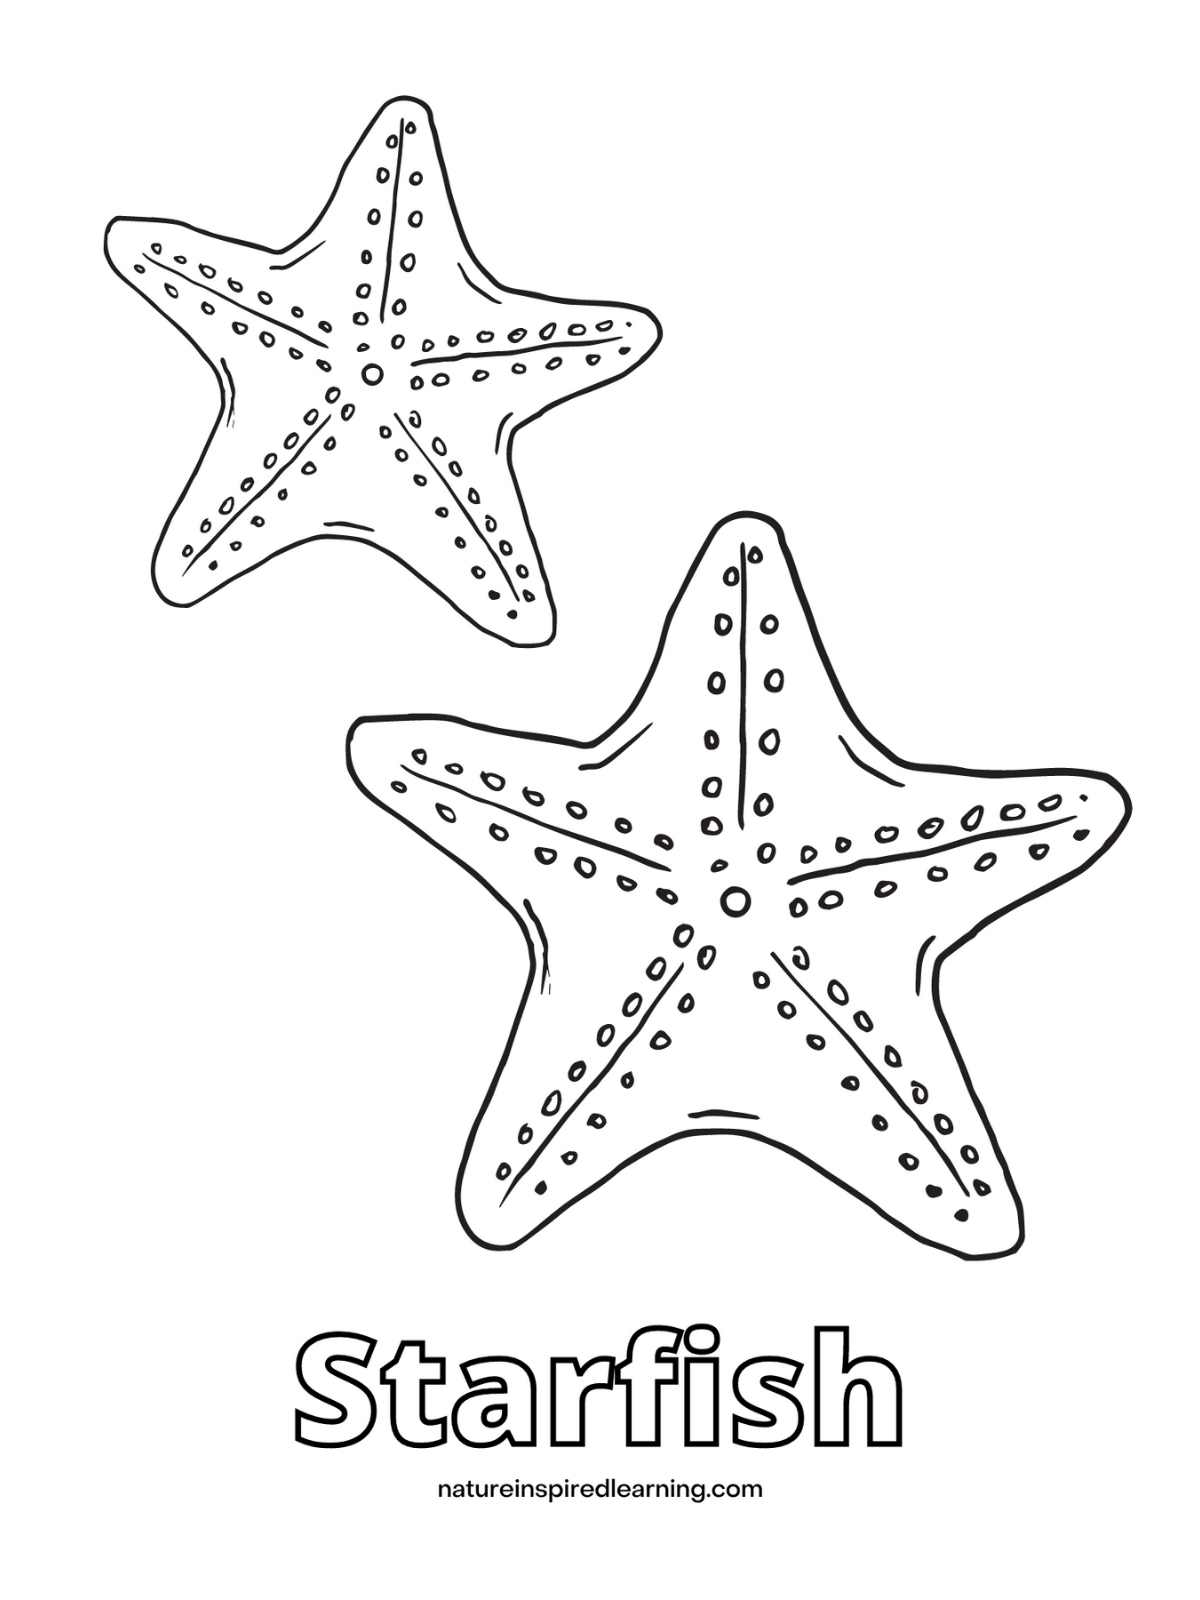 one large one small sea star with the word Starfish written below in outline form